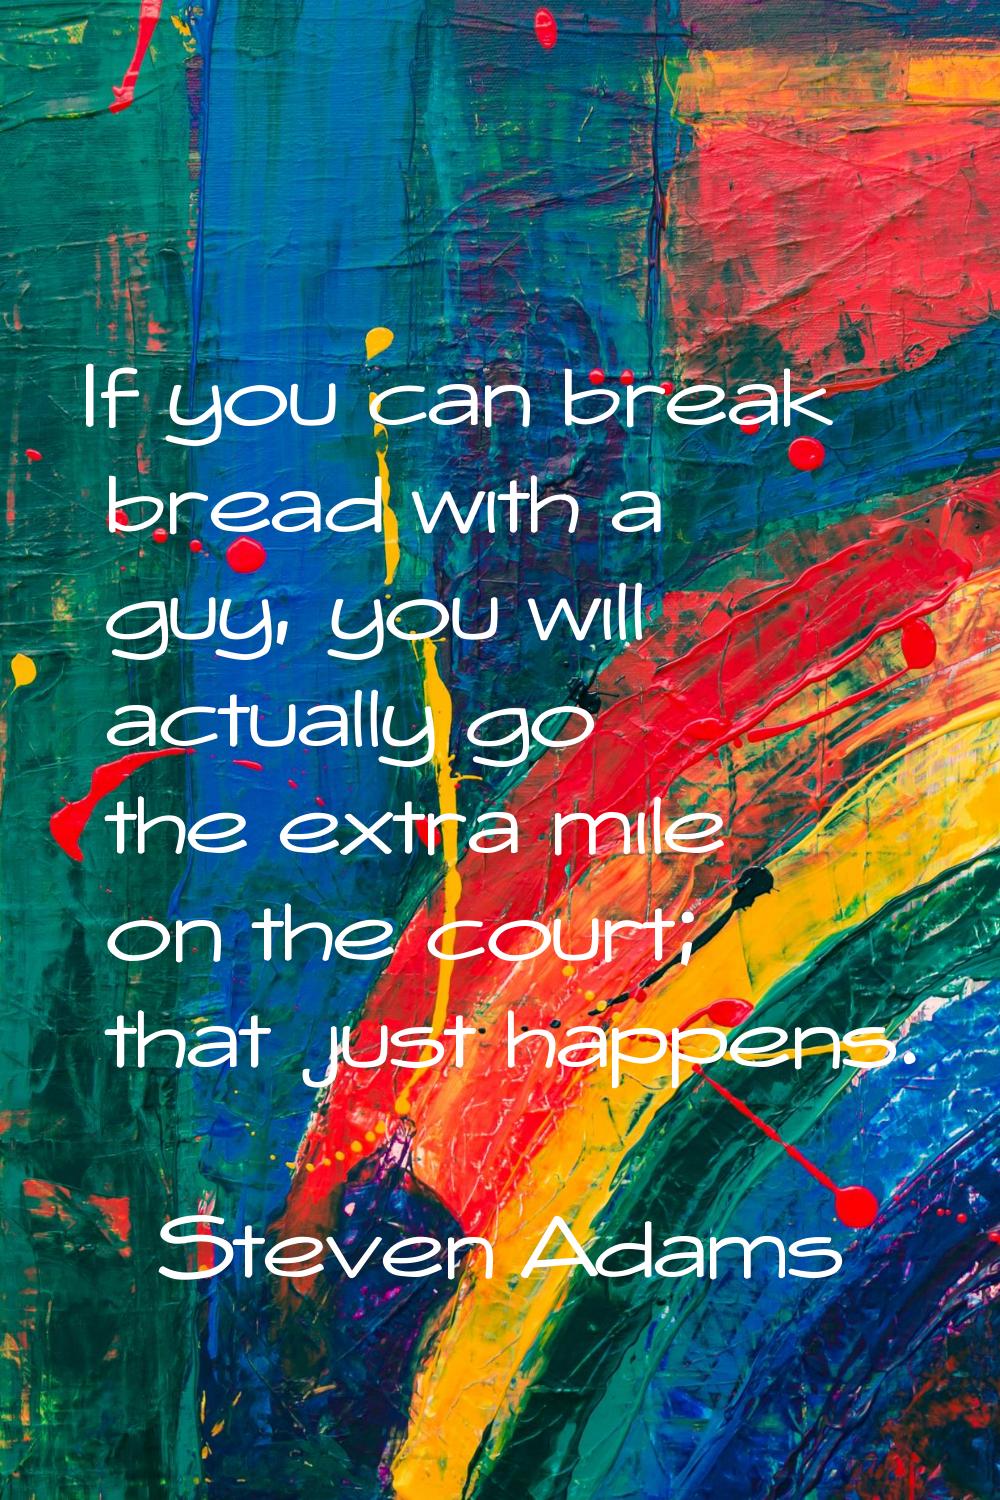 If you can break bread with a guy, you will actually go the extra mile on the court; that just happ